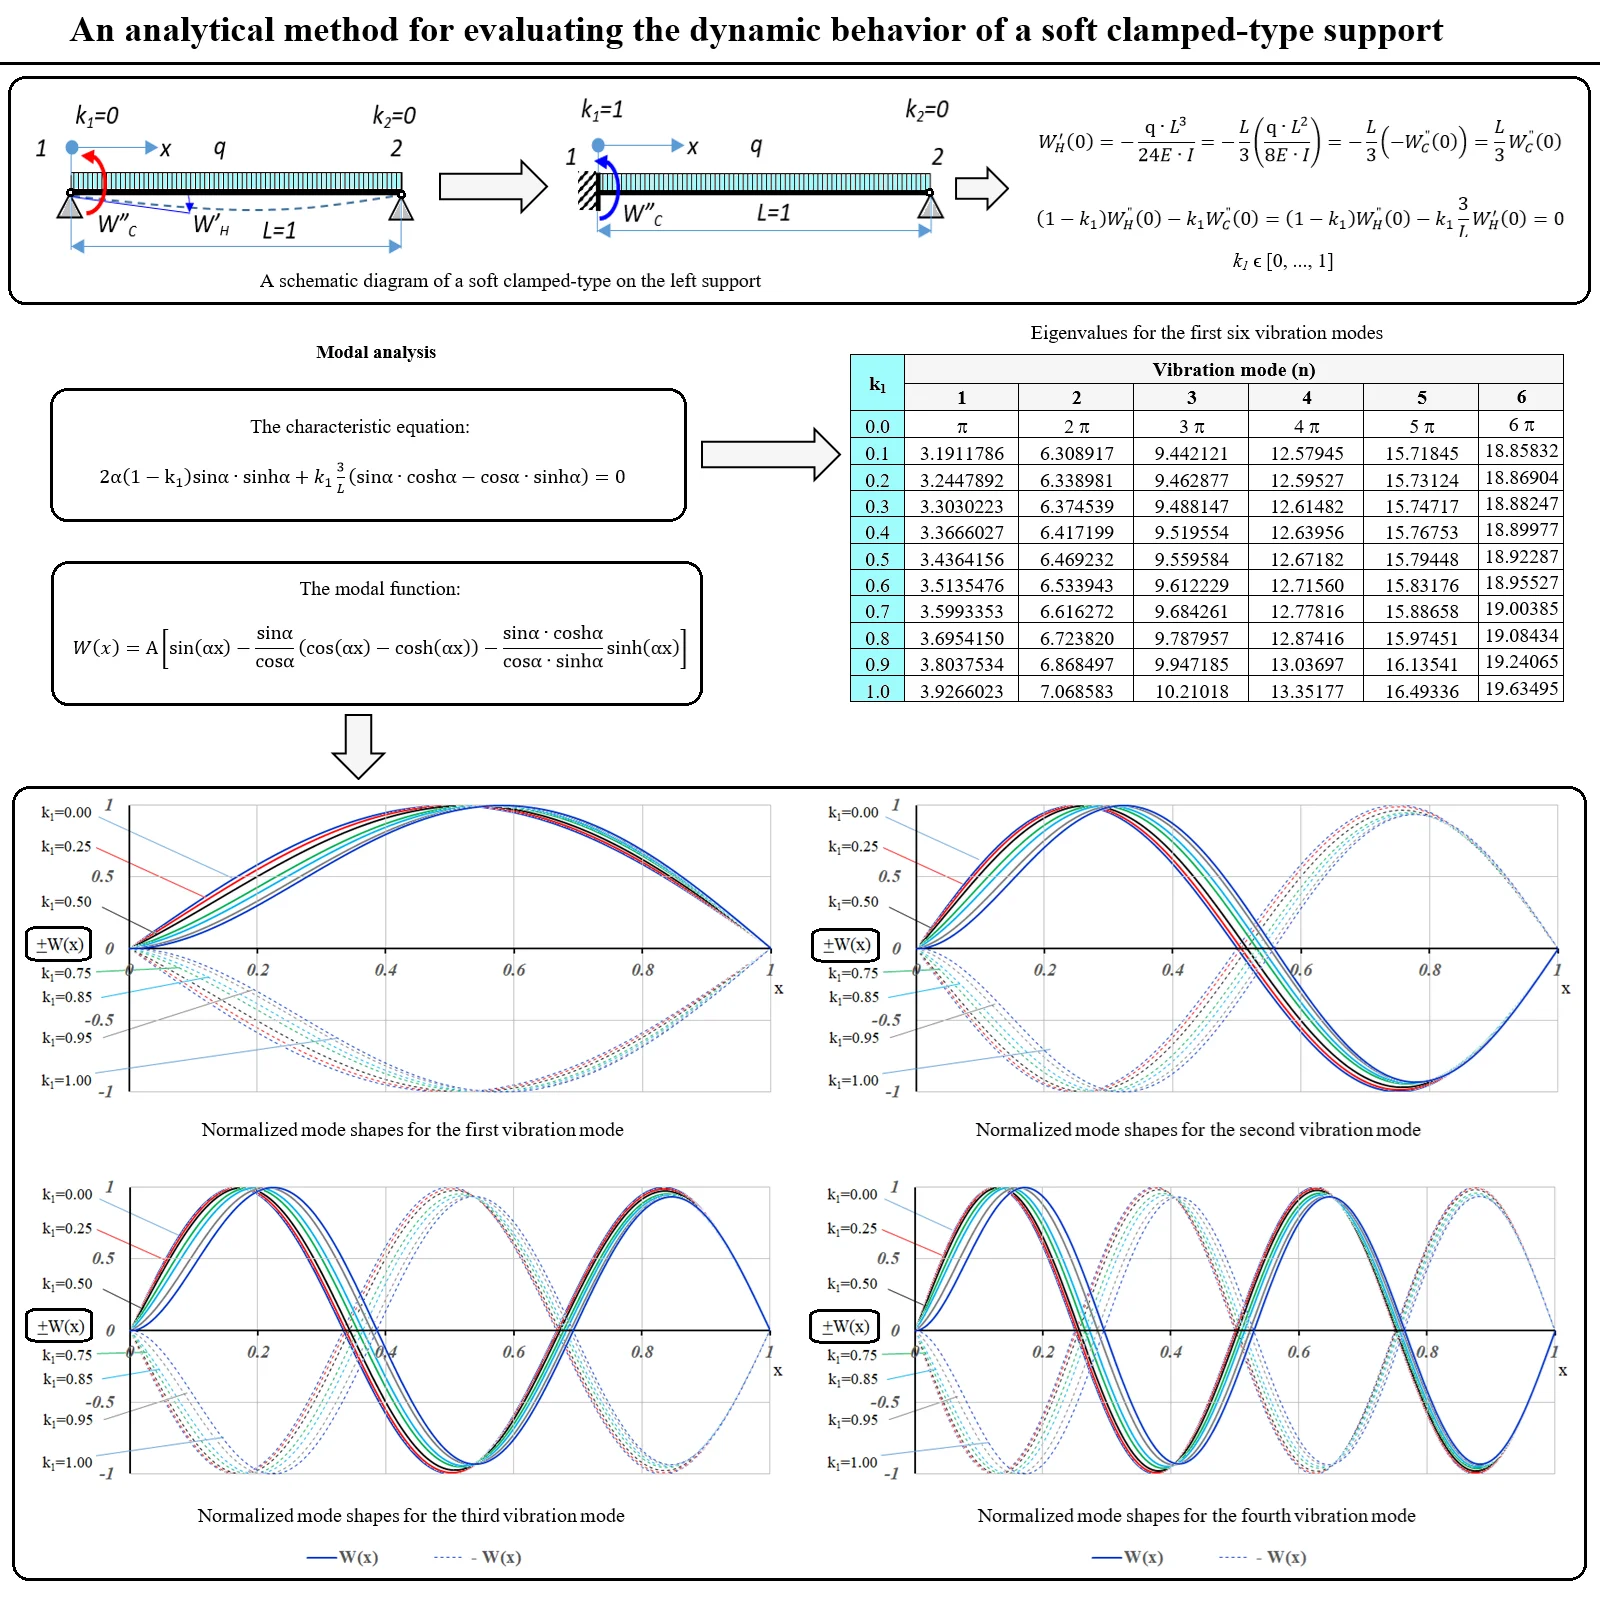 An analytical method for evaluating the dynamic behavior of a soft clamped-type support